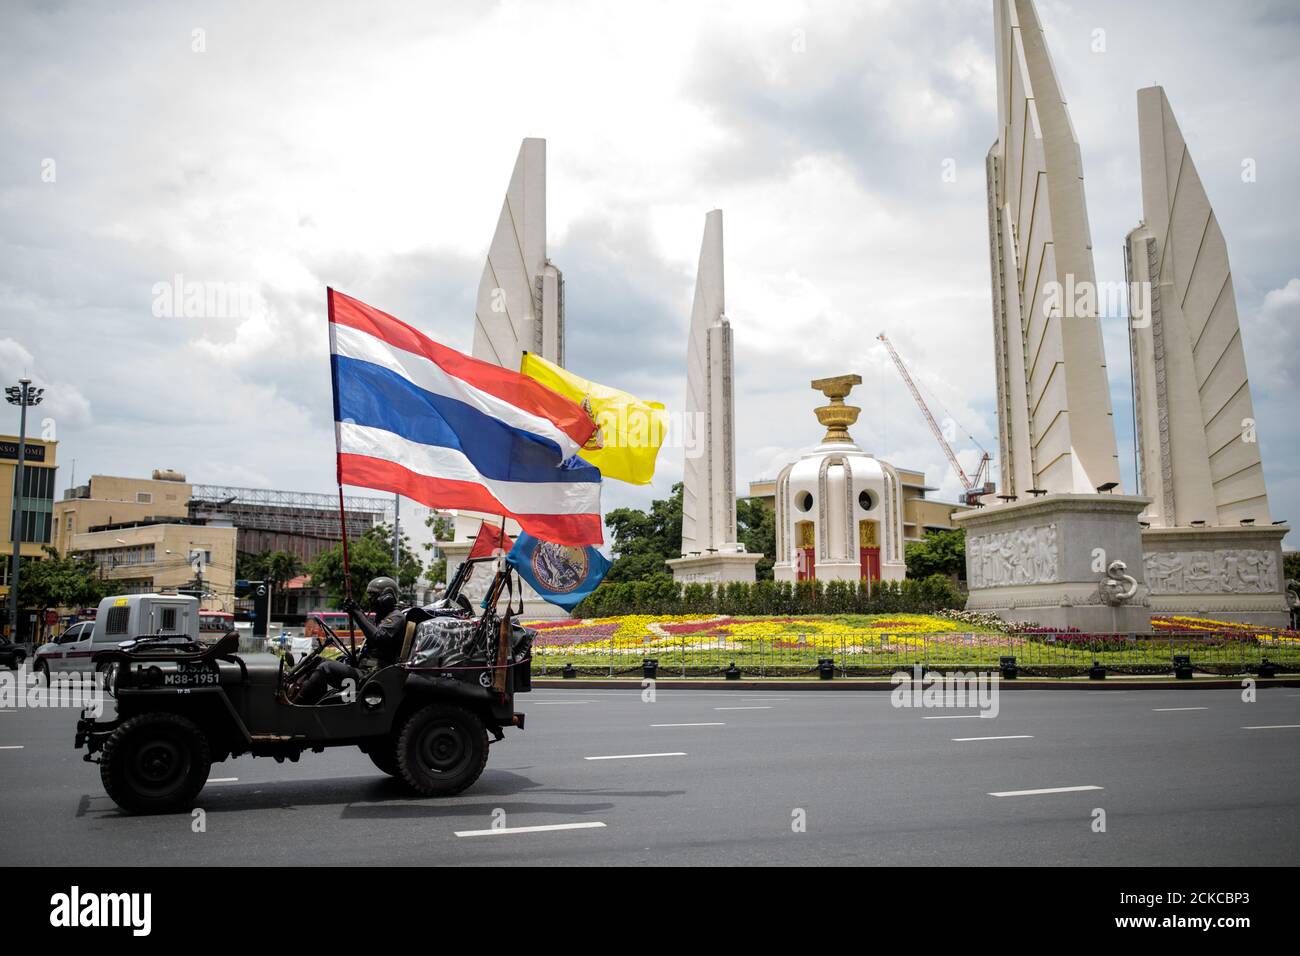 Monarchists stage a counter rally before thousands of other protesters attend a demonstration against the Government at Democracy Monument in Bangkok, Thailand on Sunday 16th, August 2020. Among the protesters' demands are calls for reform of Thailand's monarchy. (Photo - Jack Taylor) Stock Photo